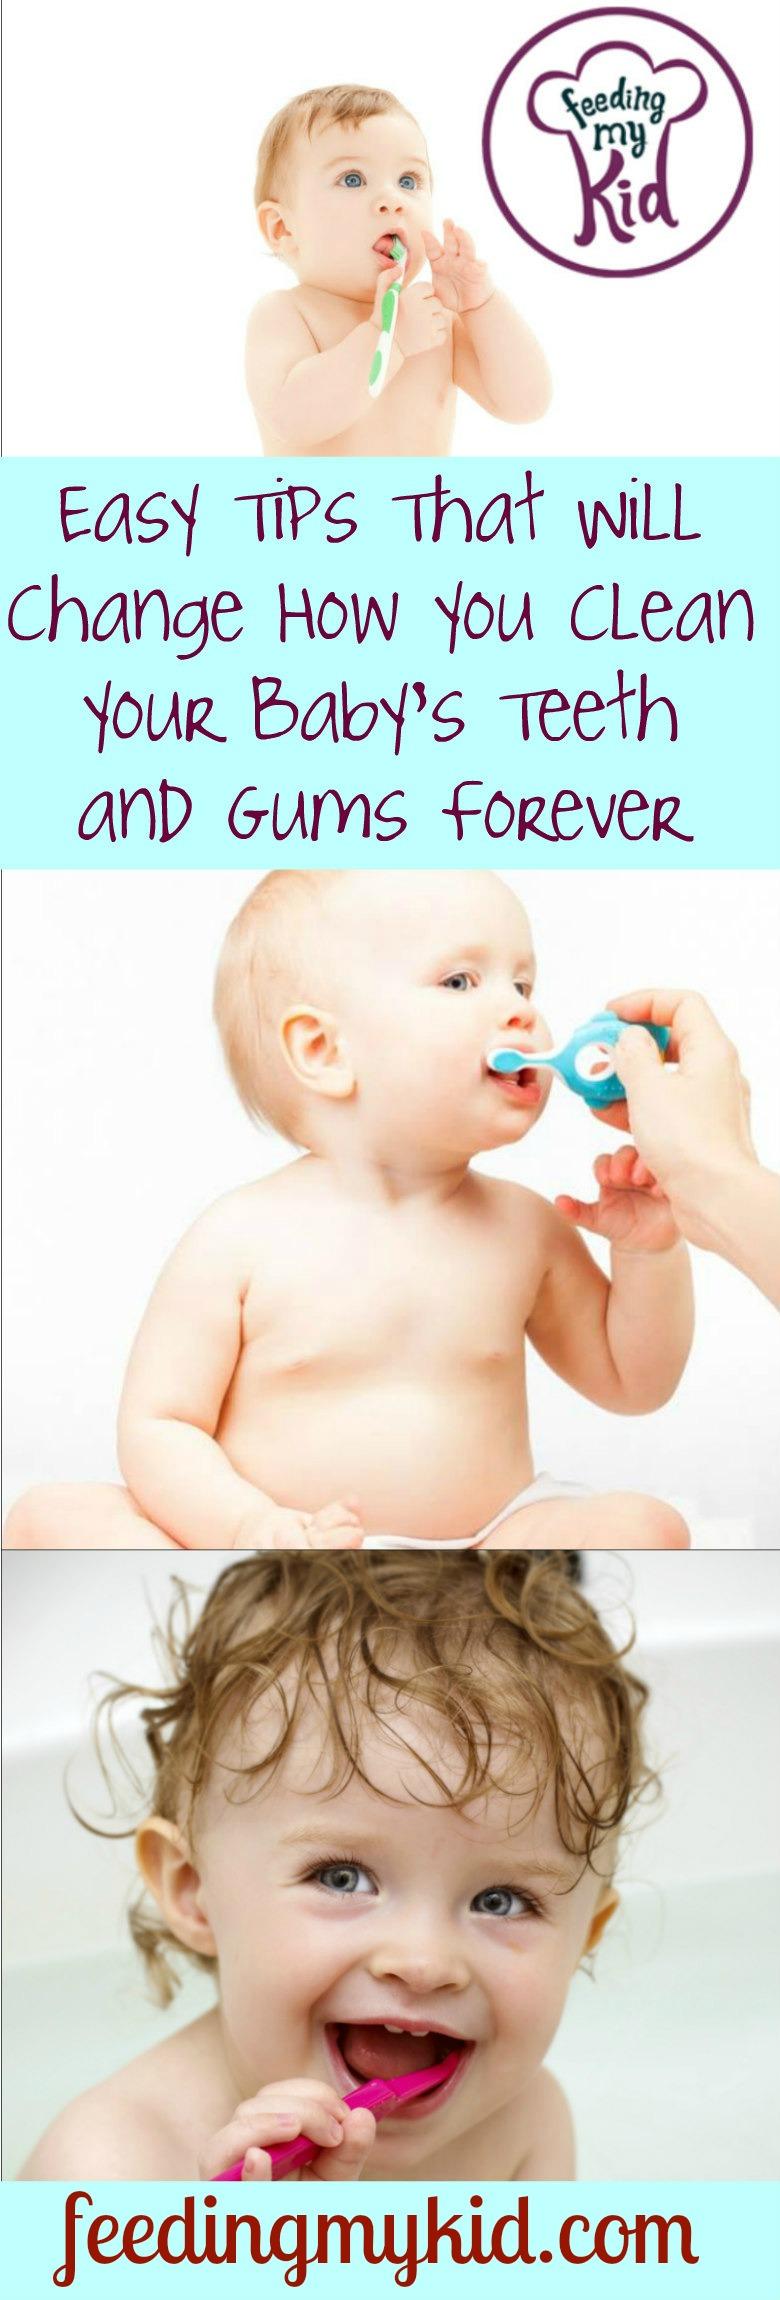 Easy Tips That Will Change How You Clean Your Baby's Teeth and Gums Forever